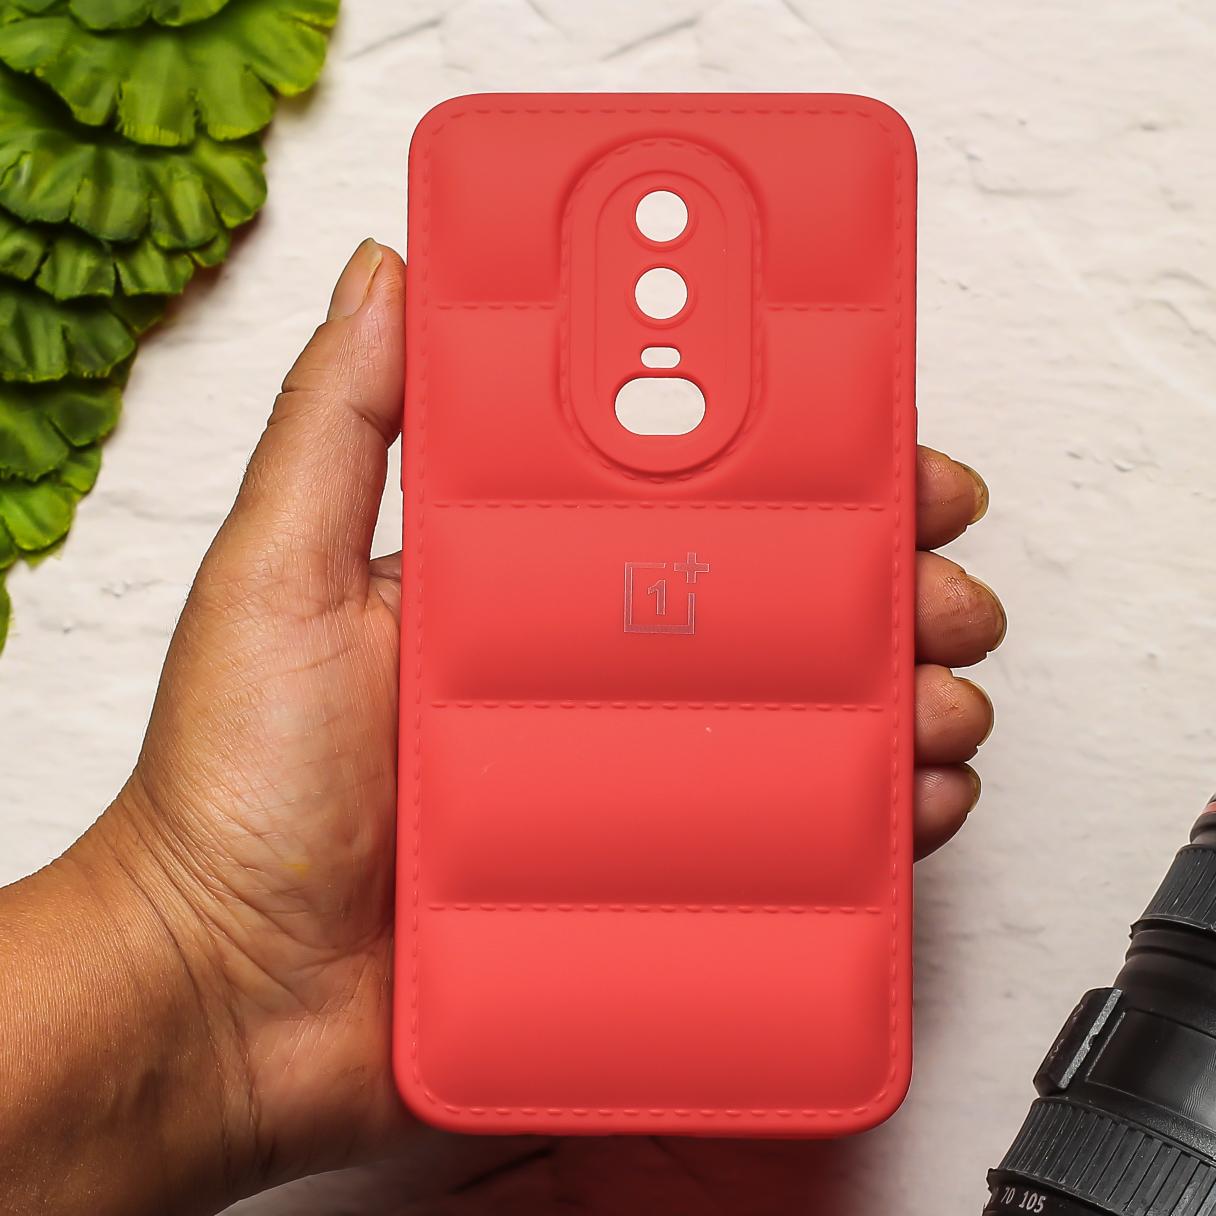 Red Puffon silicone case for Oneplus 6